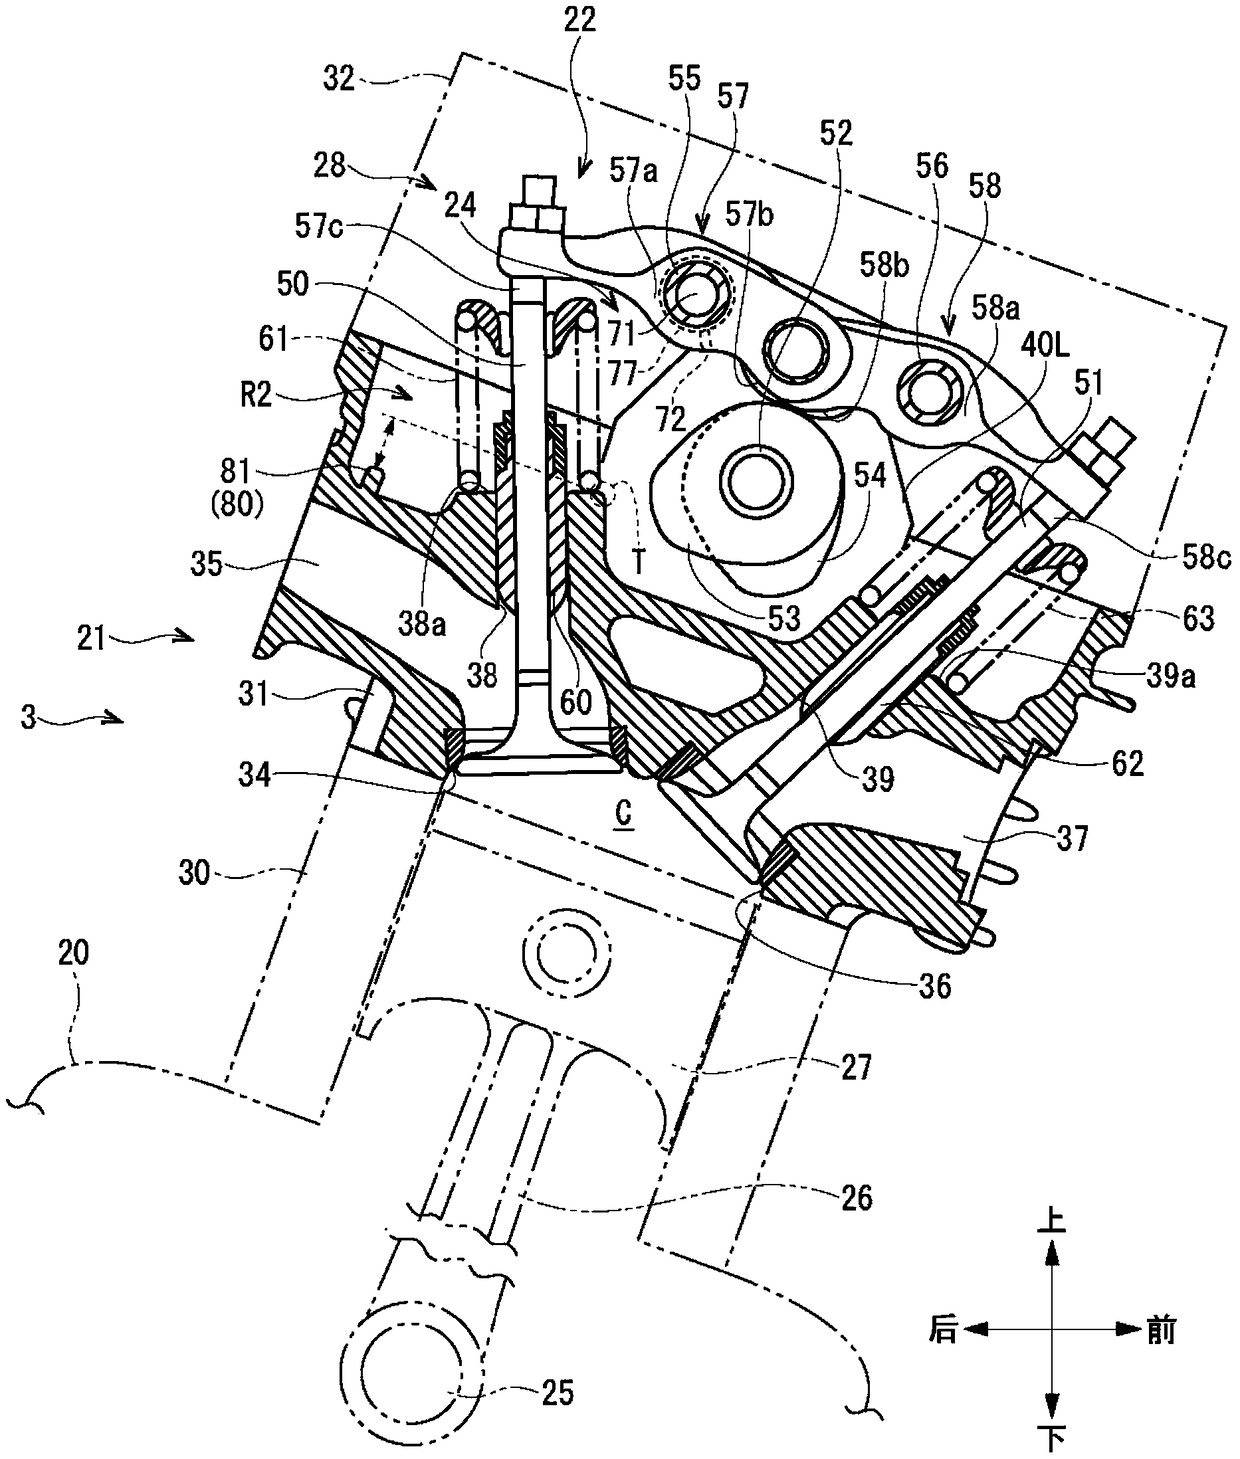 Valve drive lubrication for internal combustion engines